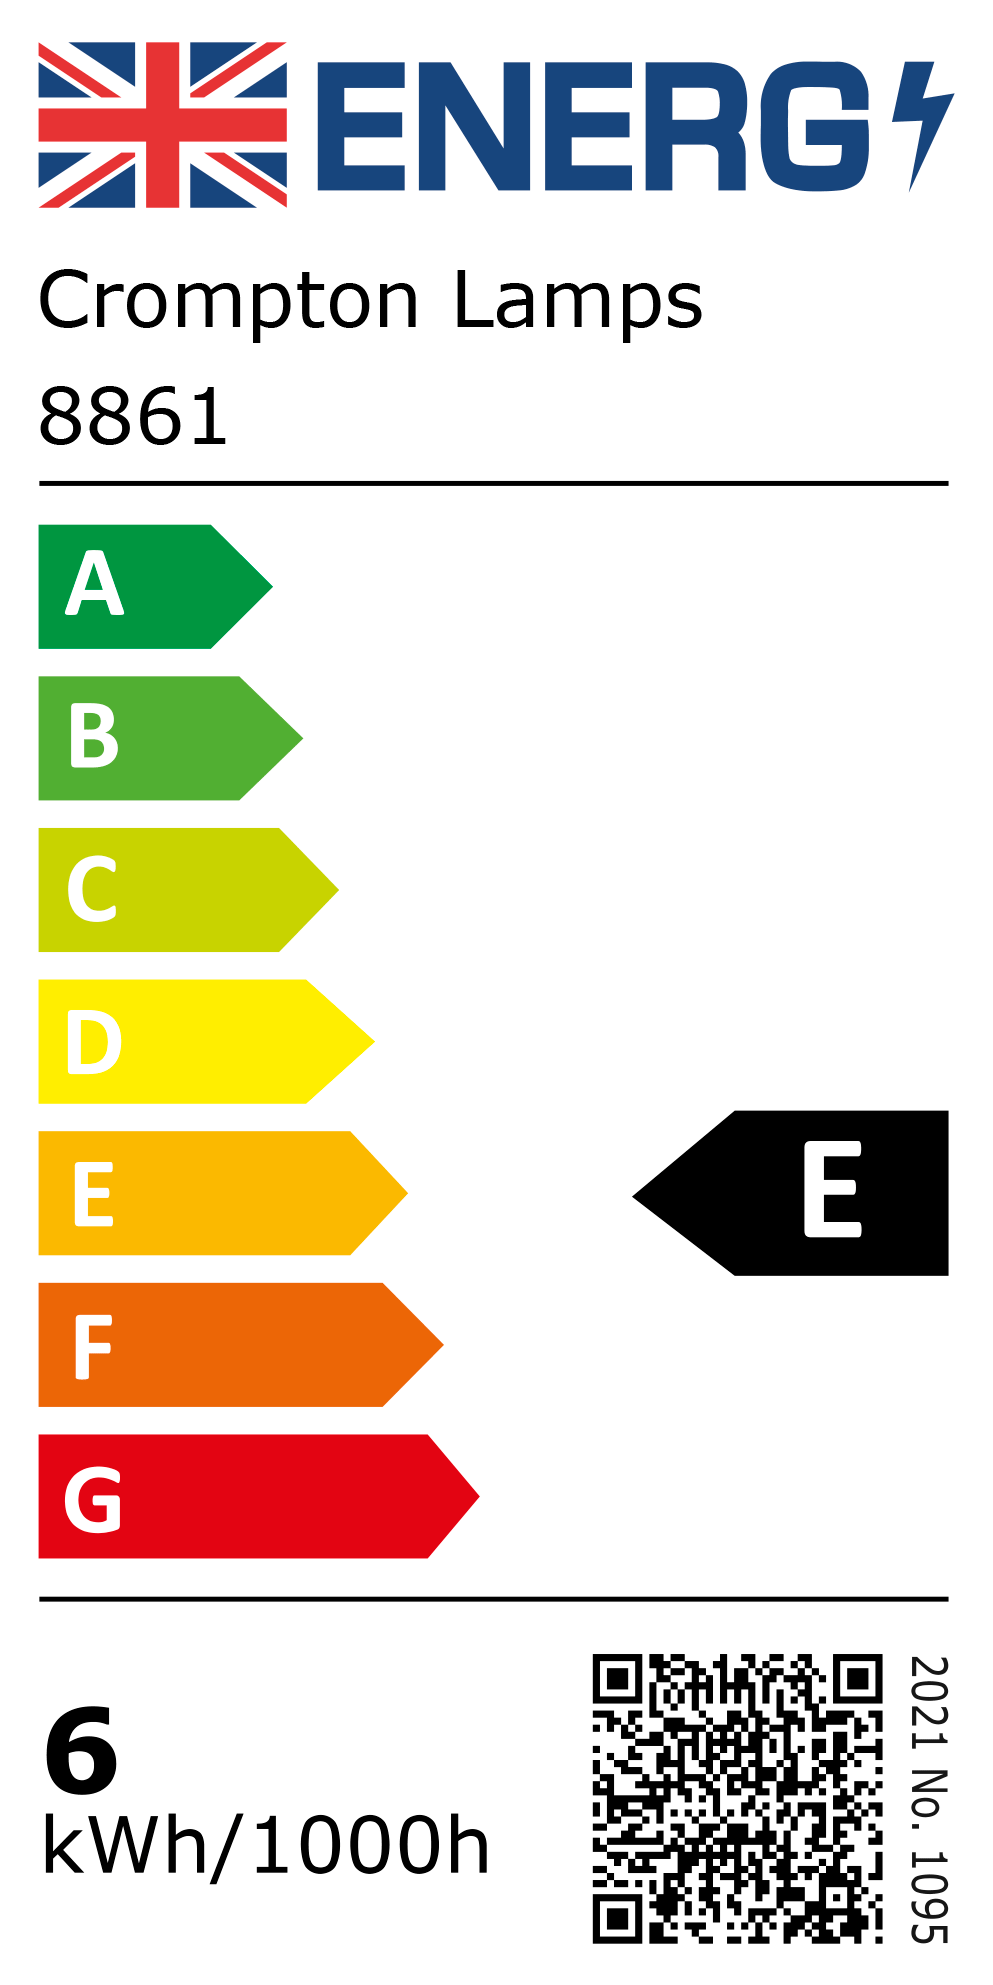 New 2021 Energy Rating Label: Stock Code 8861